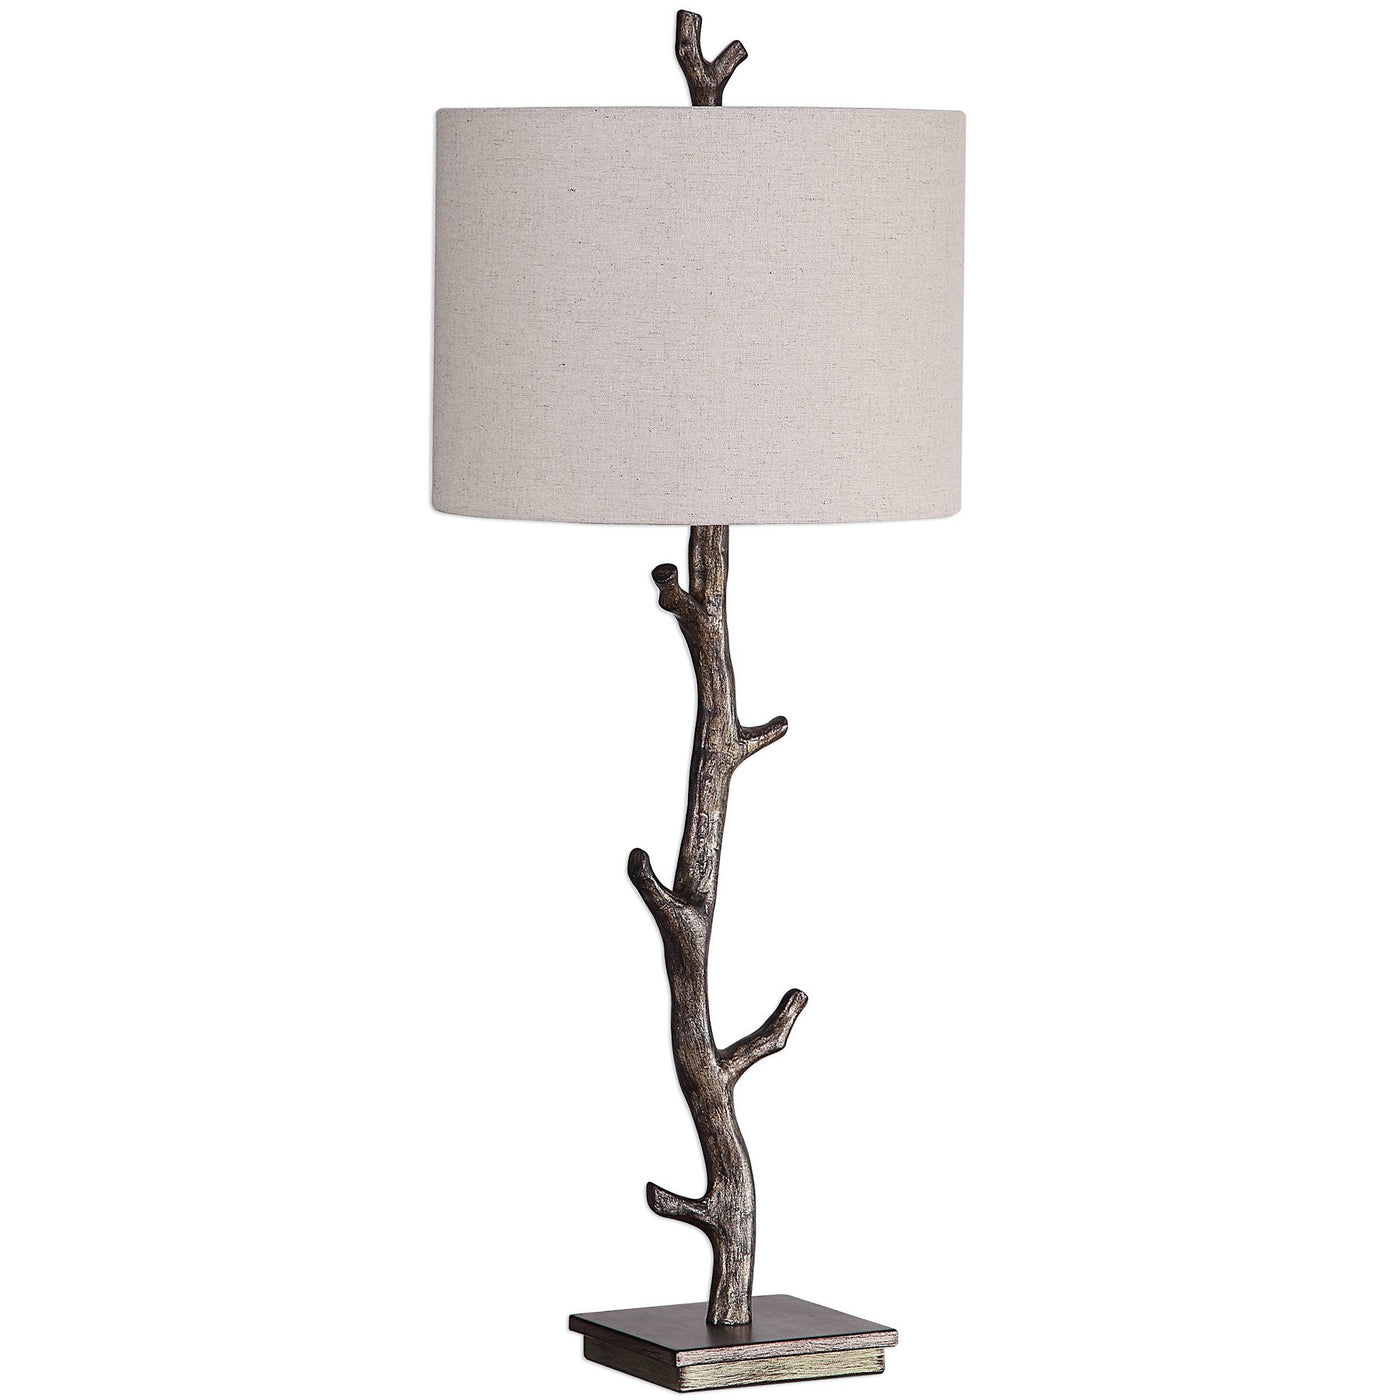 The Denali - Modern Wooden Style Table Lamp Other Lamps Glass.com 